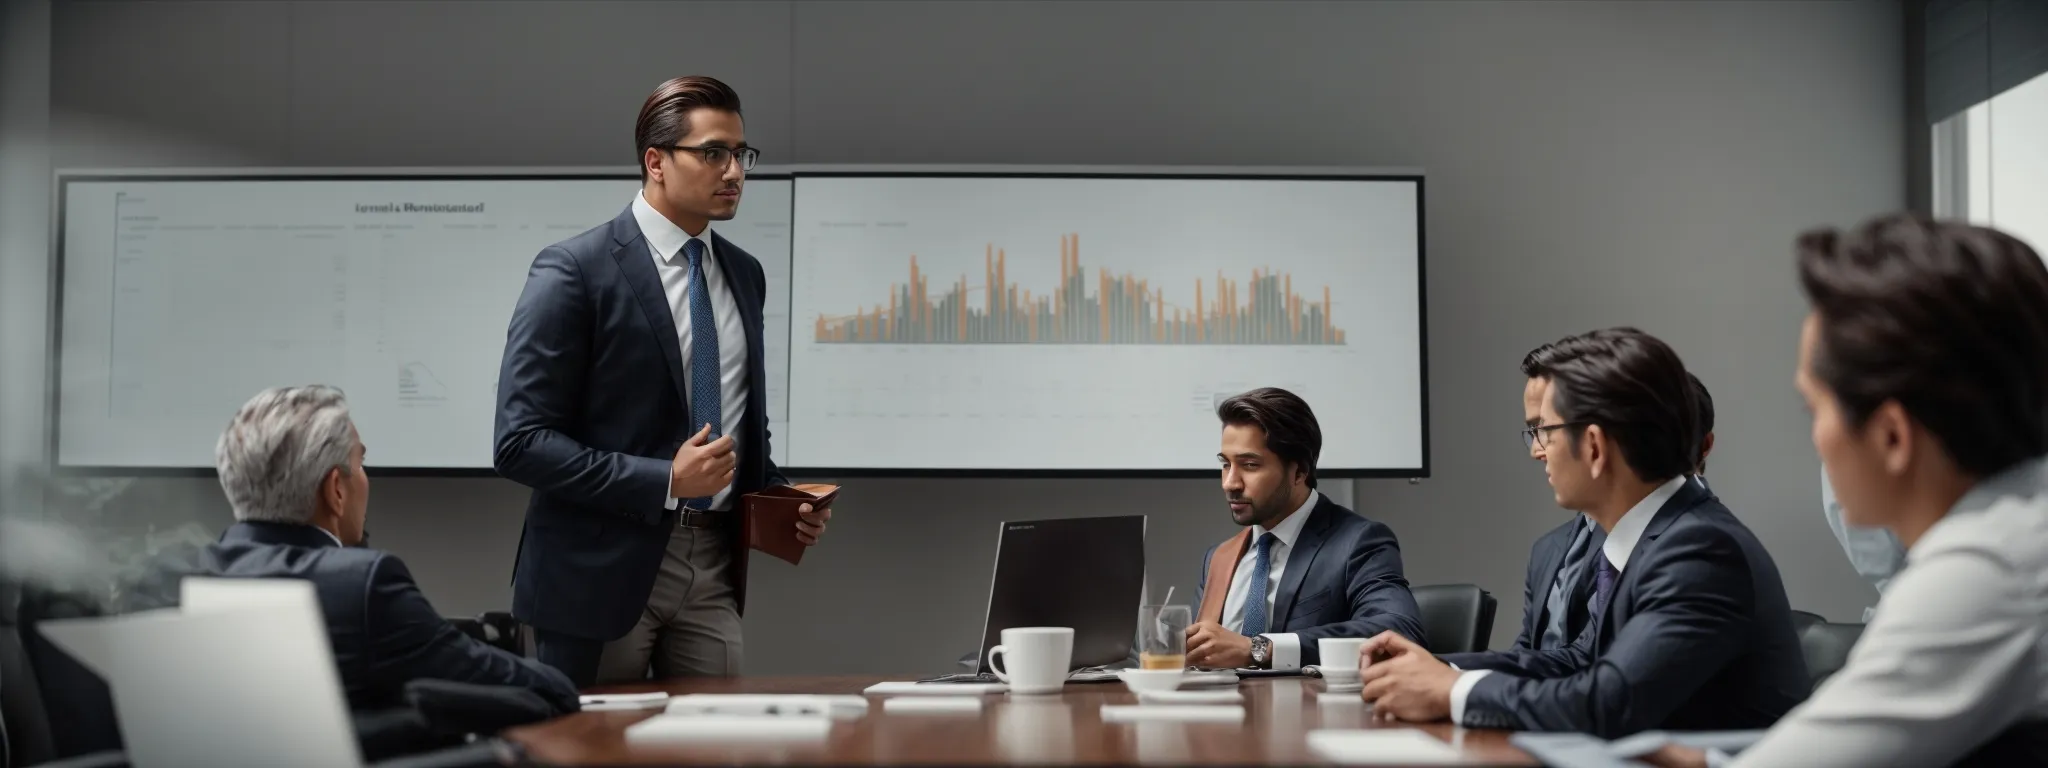 a confident business professional presents a graph showing upward growth trends to attentive executives in a modern boardroom.